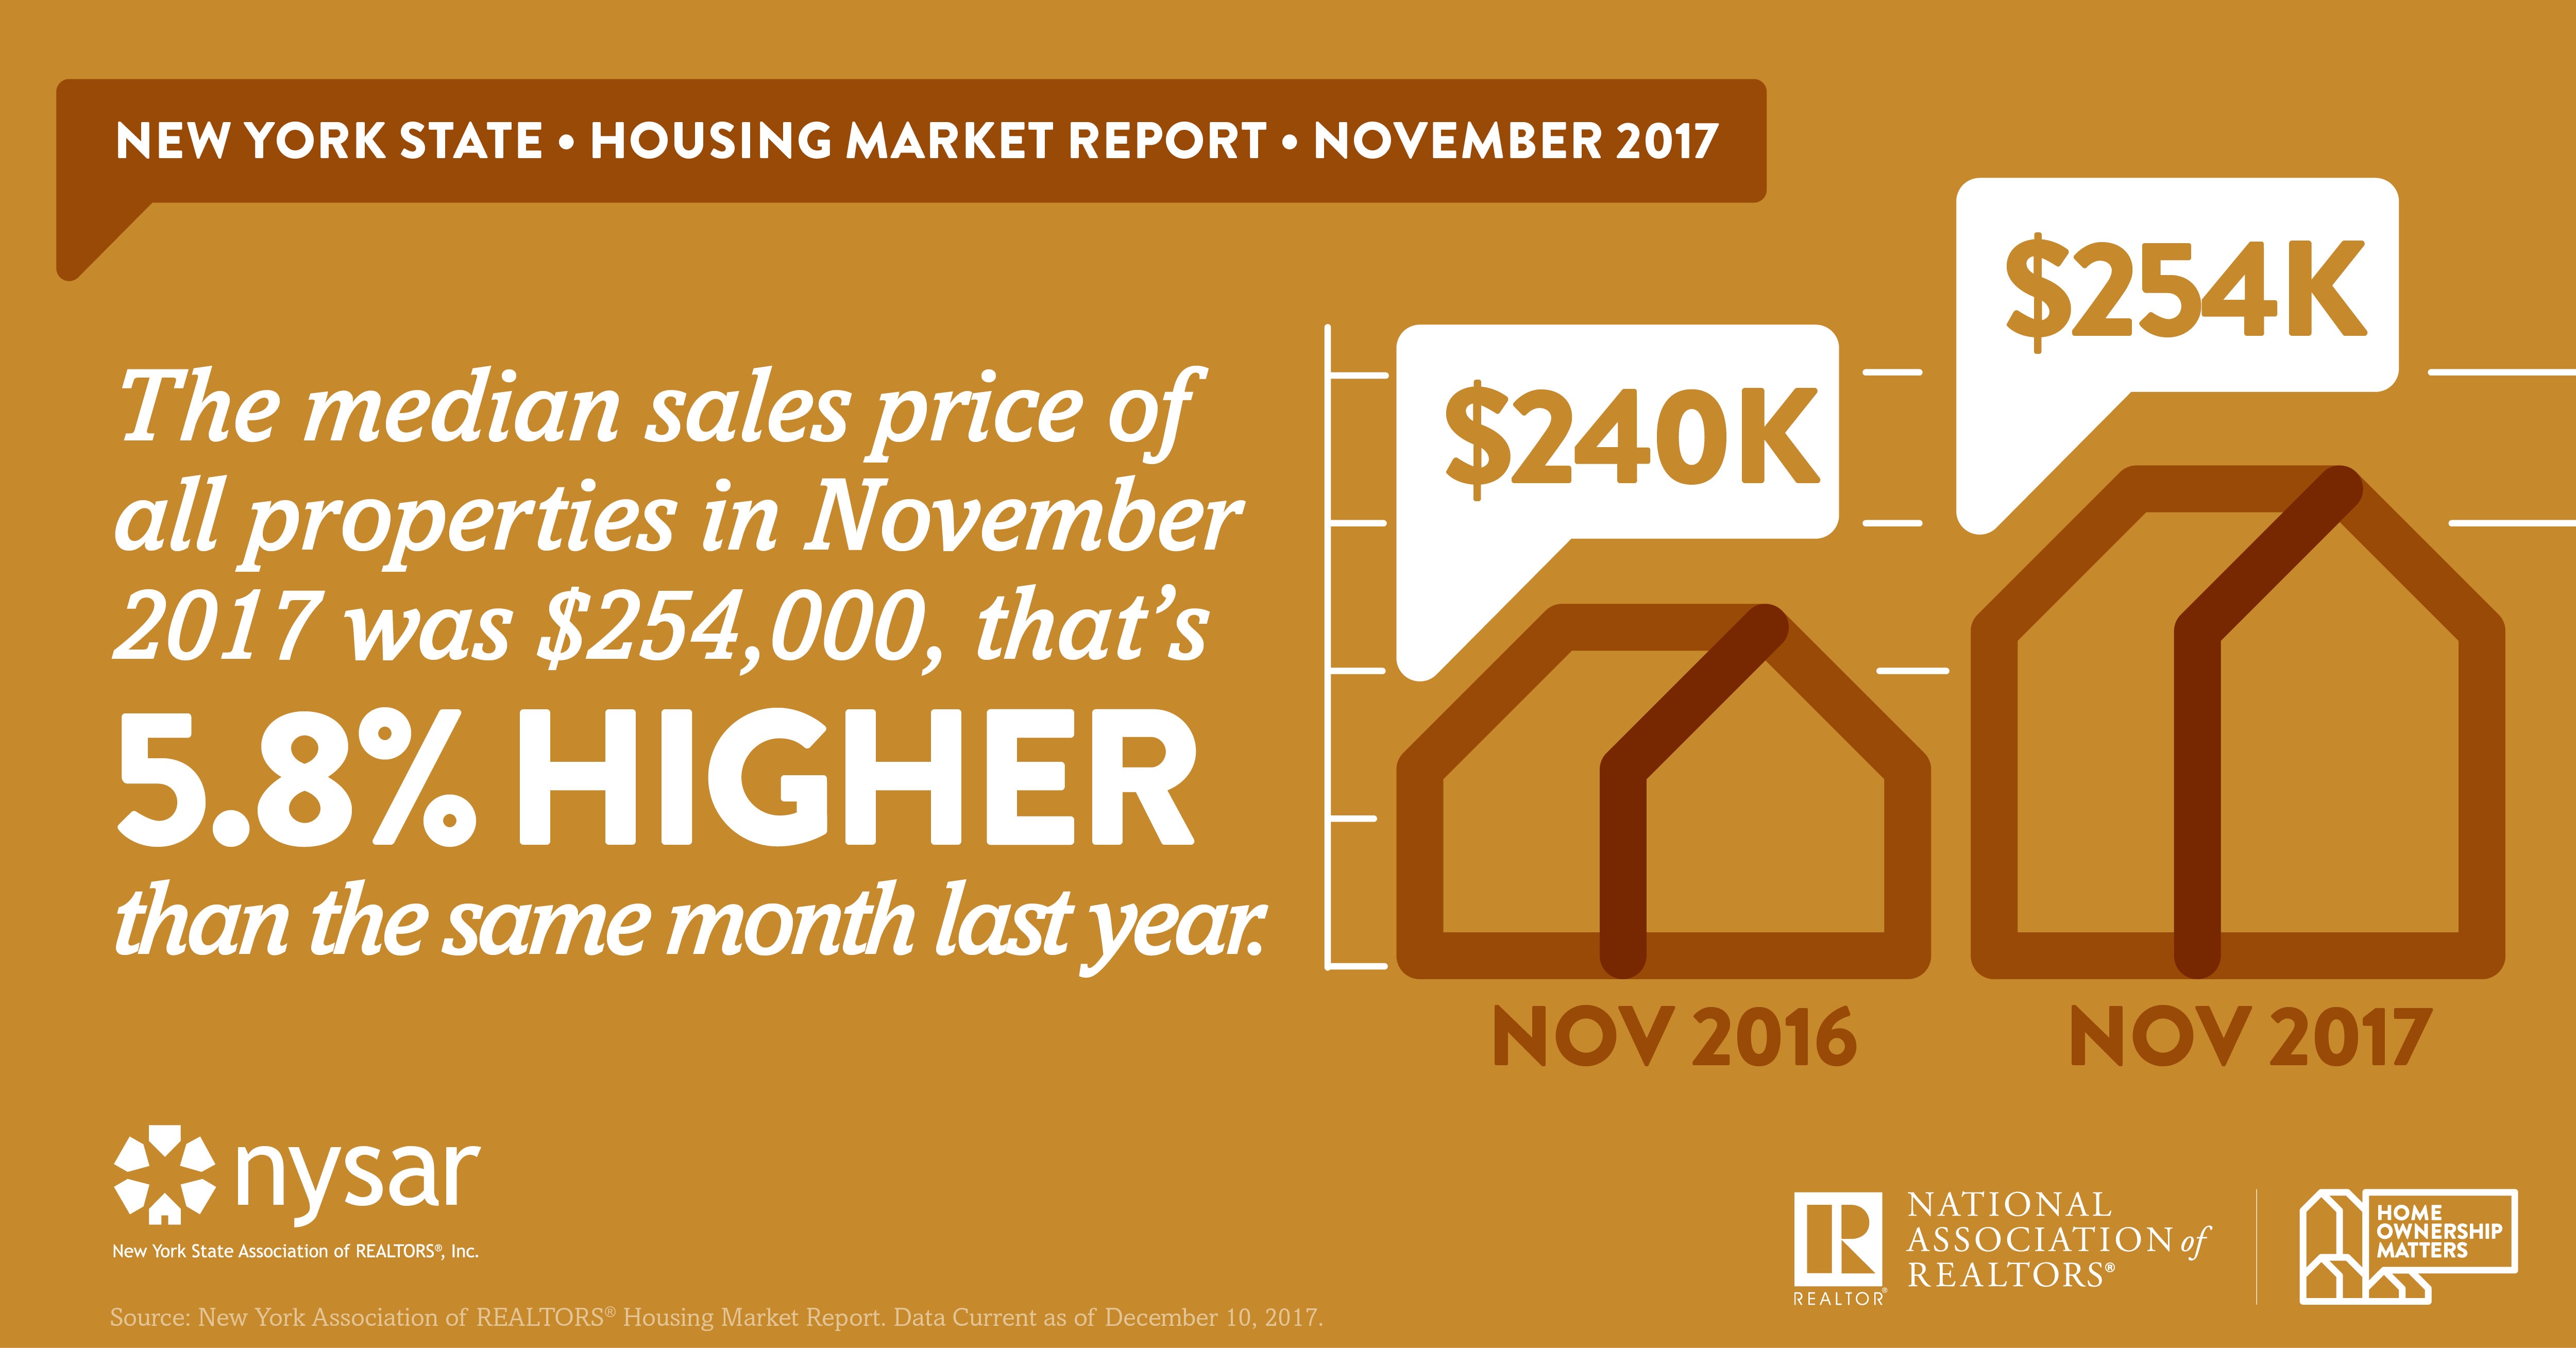 Median sales price of a home in New York was $254,000, a 5.8% increase over the same time in 2016.